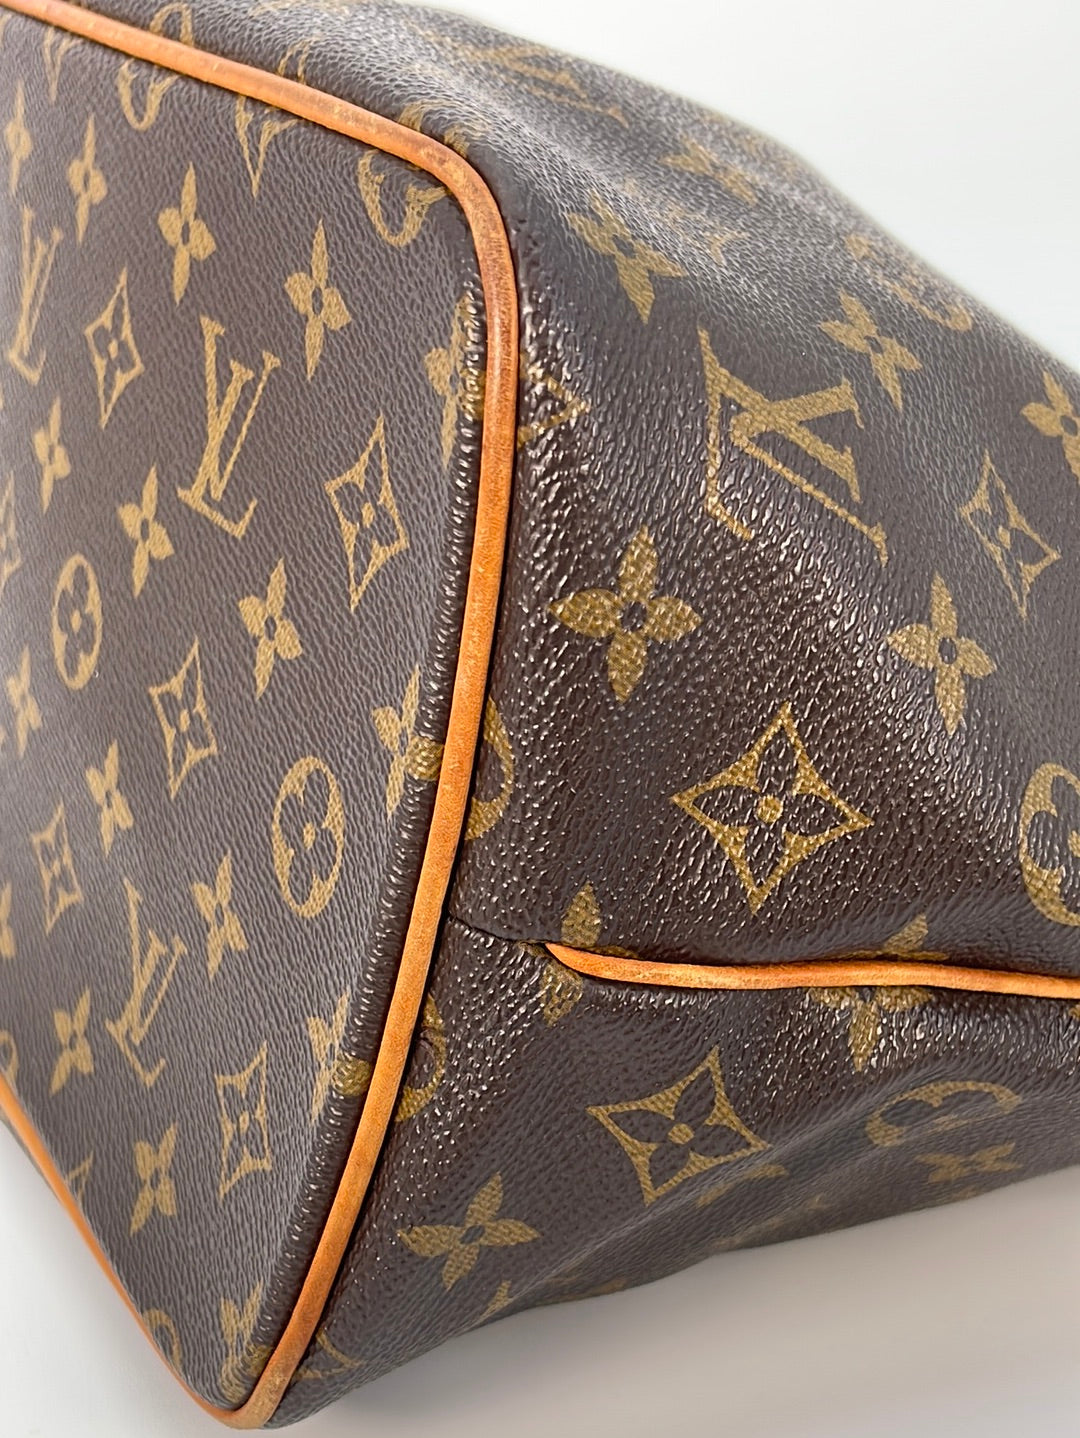 Louis Vuitton Palermo PM Monogram 2012 in Very Good Condition with Bag,  Strap, Dustbag, Tag and Receipt Harga 7.500.000 #lvpalermopm